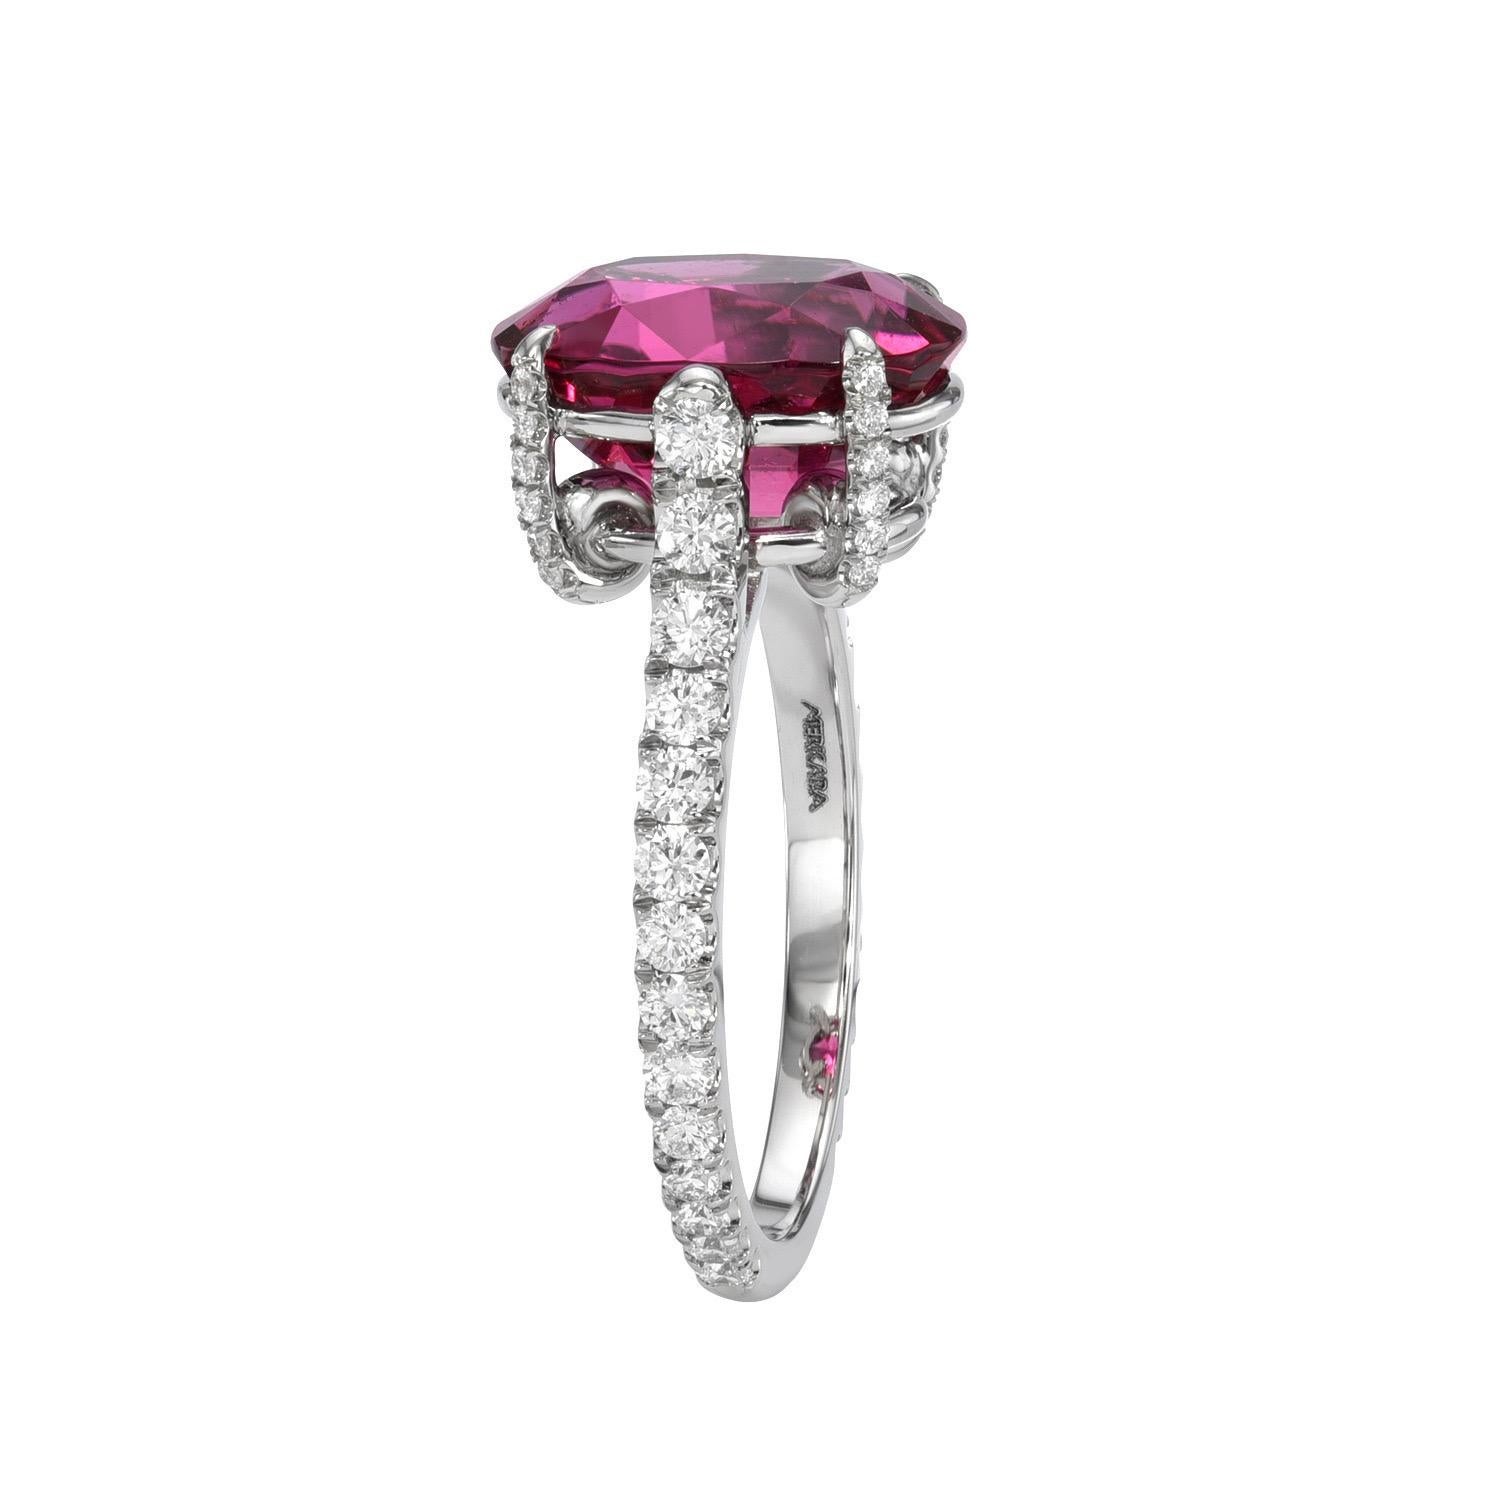 Supreme 3.92 carat Rubelite Tourmaline oval platinum ring, decorated with a total of 0.68 carat round brilliant collection diamonds.
Ring size 6. Resizing is complementary upon request.
Crafted by extremely skilled hands in the USA. 
Returns are